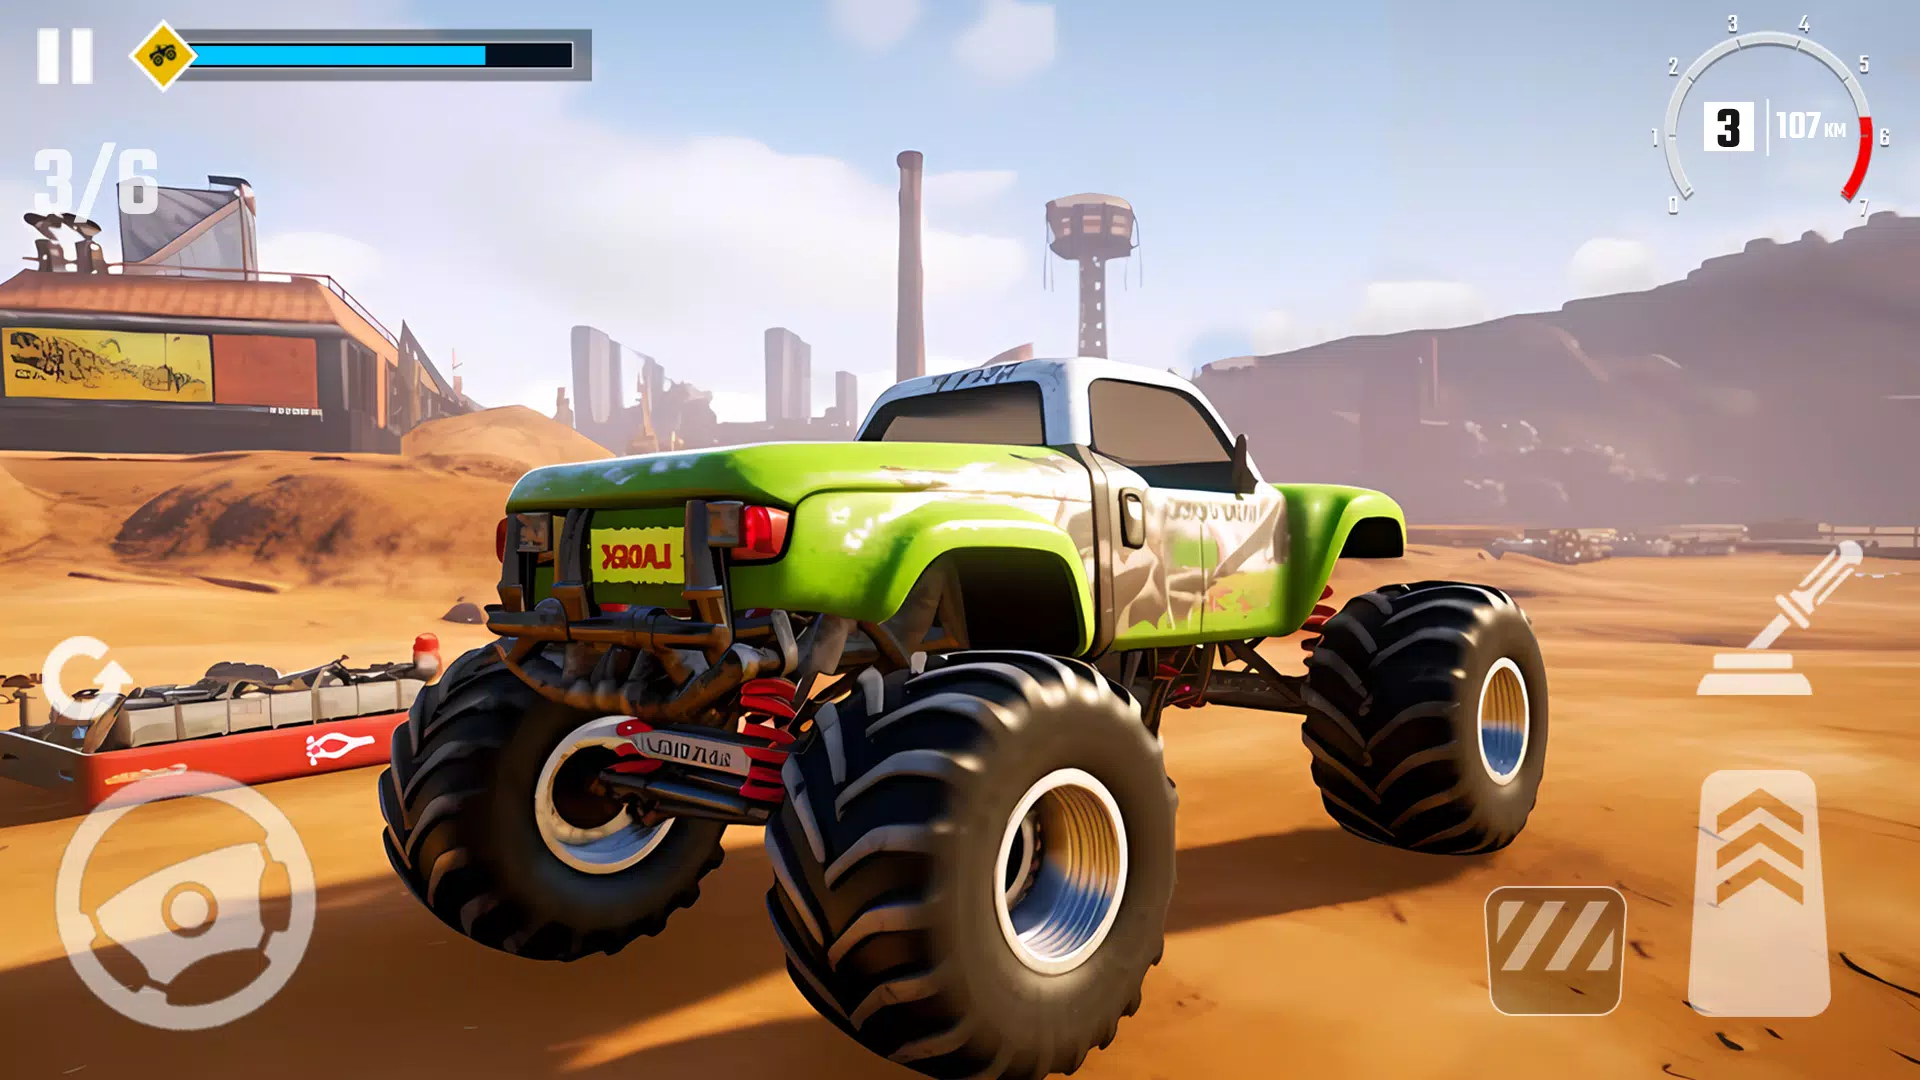 Download do APK de Monster Truck Mad Racing Game para Android